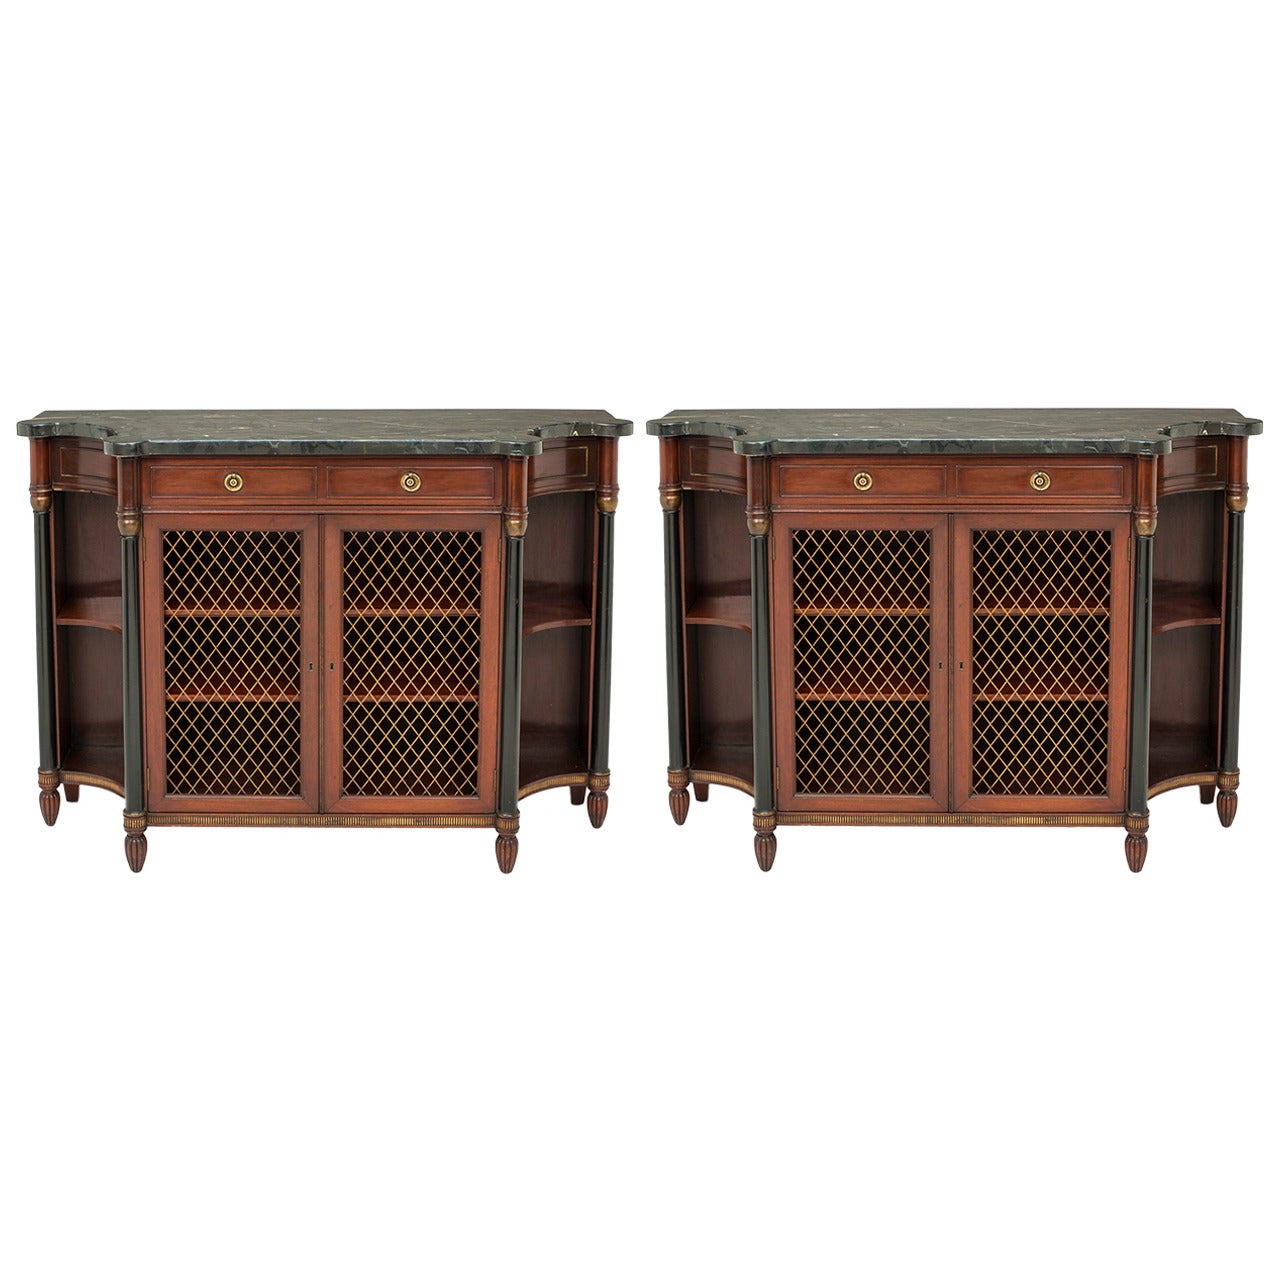 Pair of Marble-Top Console Cabinets, circa 1920s